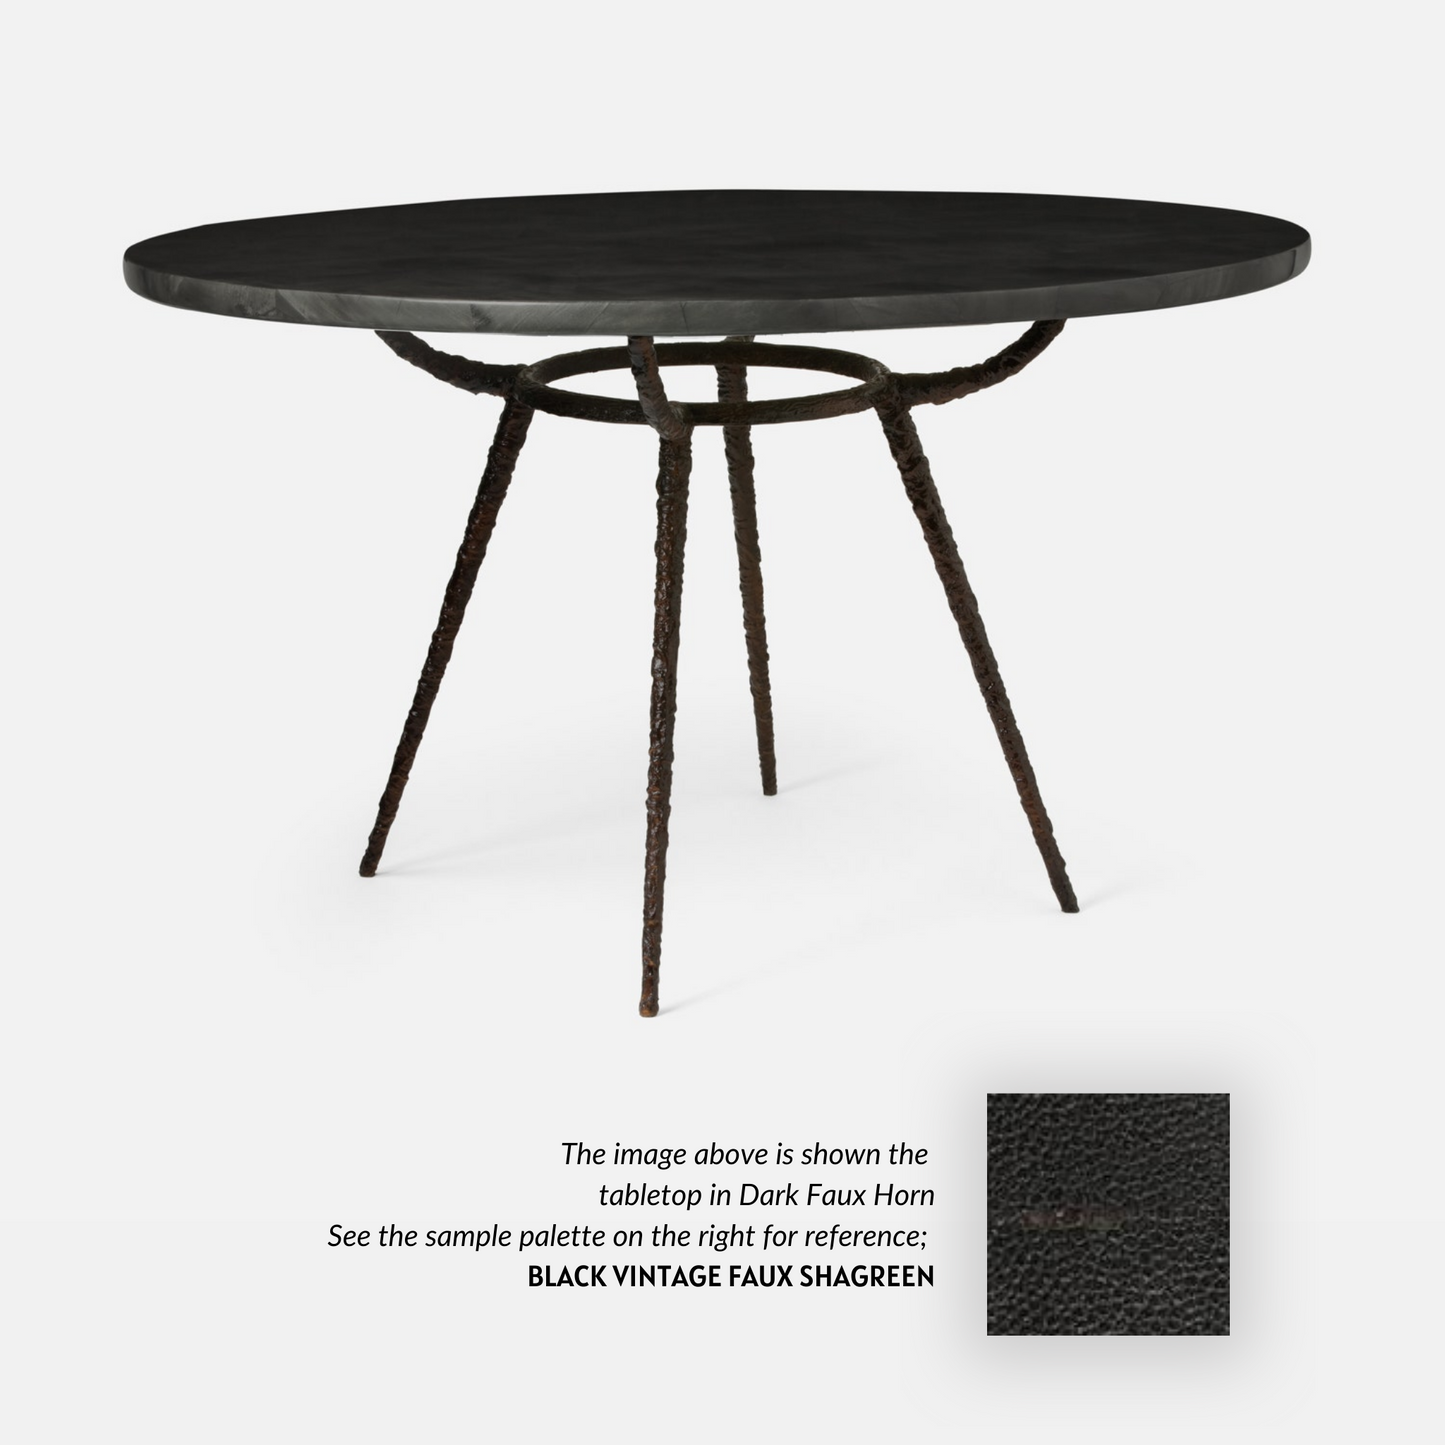 Made Goods Grace 72" x 30" Bronze Pitted Iron Dinning Table With Round Black Vintage Faux Shagreen Table Top